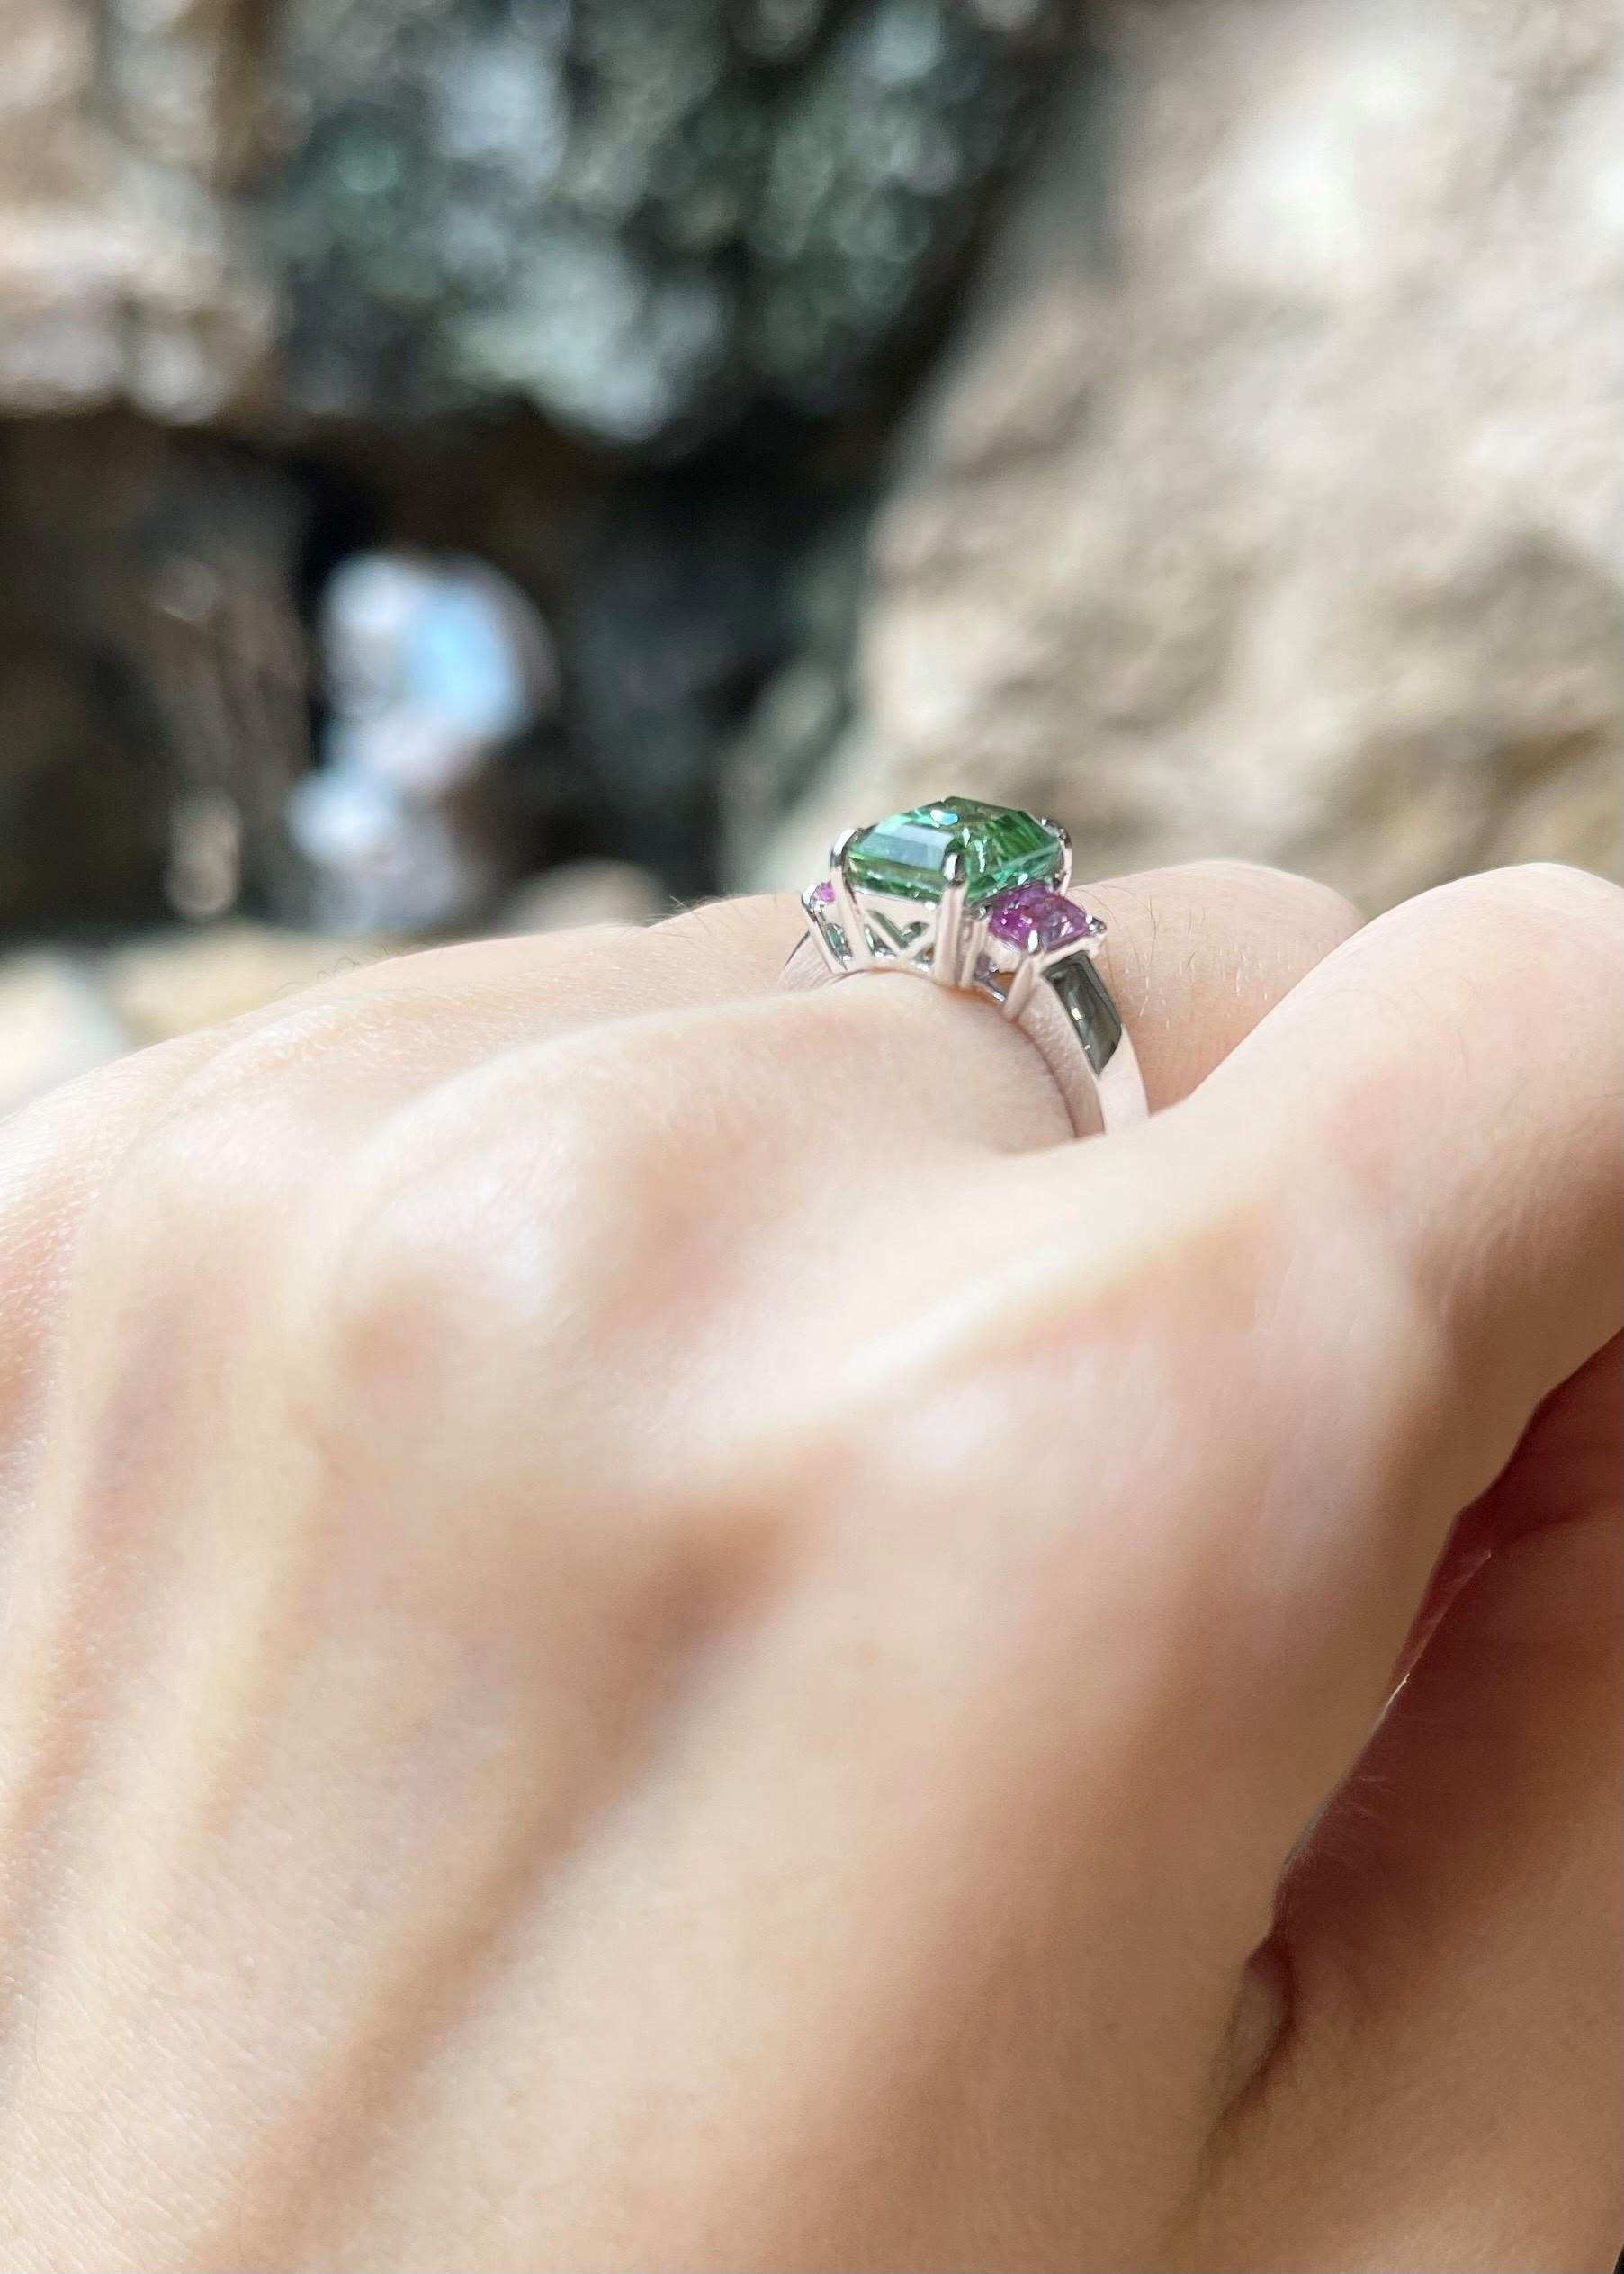 Green Tourmaline 2.17 carats with Pink Sapphire 0.58 carat Ring set in 18K White Gold Settings

Width:  1.1 cm 
Length: 0.8 cm
Ring Size: 52
Total Weight: 4.77 grams

Green Tourmaline 
Width:  0.6 cm 
Length: 0.8 cm

